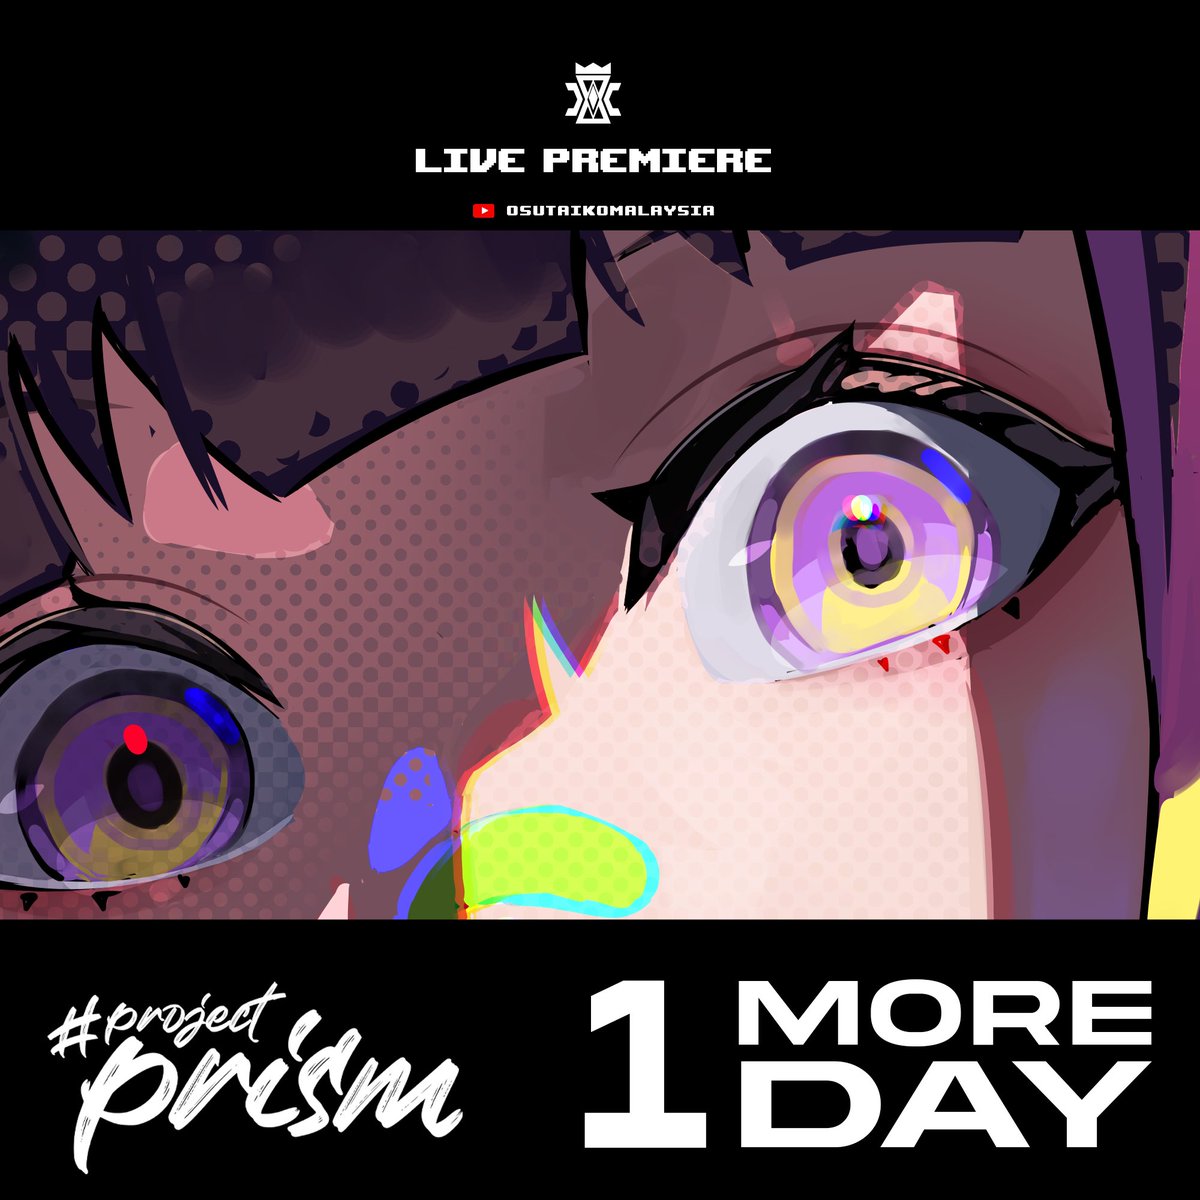 🚨 ━━━━━━━━ 　⚠️ONE MORE DAY⚠️ 　　━━━━━━━━ 🚨 Catch the LIVE PREMIERE of #ProjectPrism tomorrow, you do not want to miss it! 📌Saturday, 13th Apr 🎥21:00, UTC+8 ▶️ Live on Youtube: youtu.be/N6PRgV6Hu5s